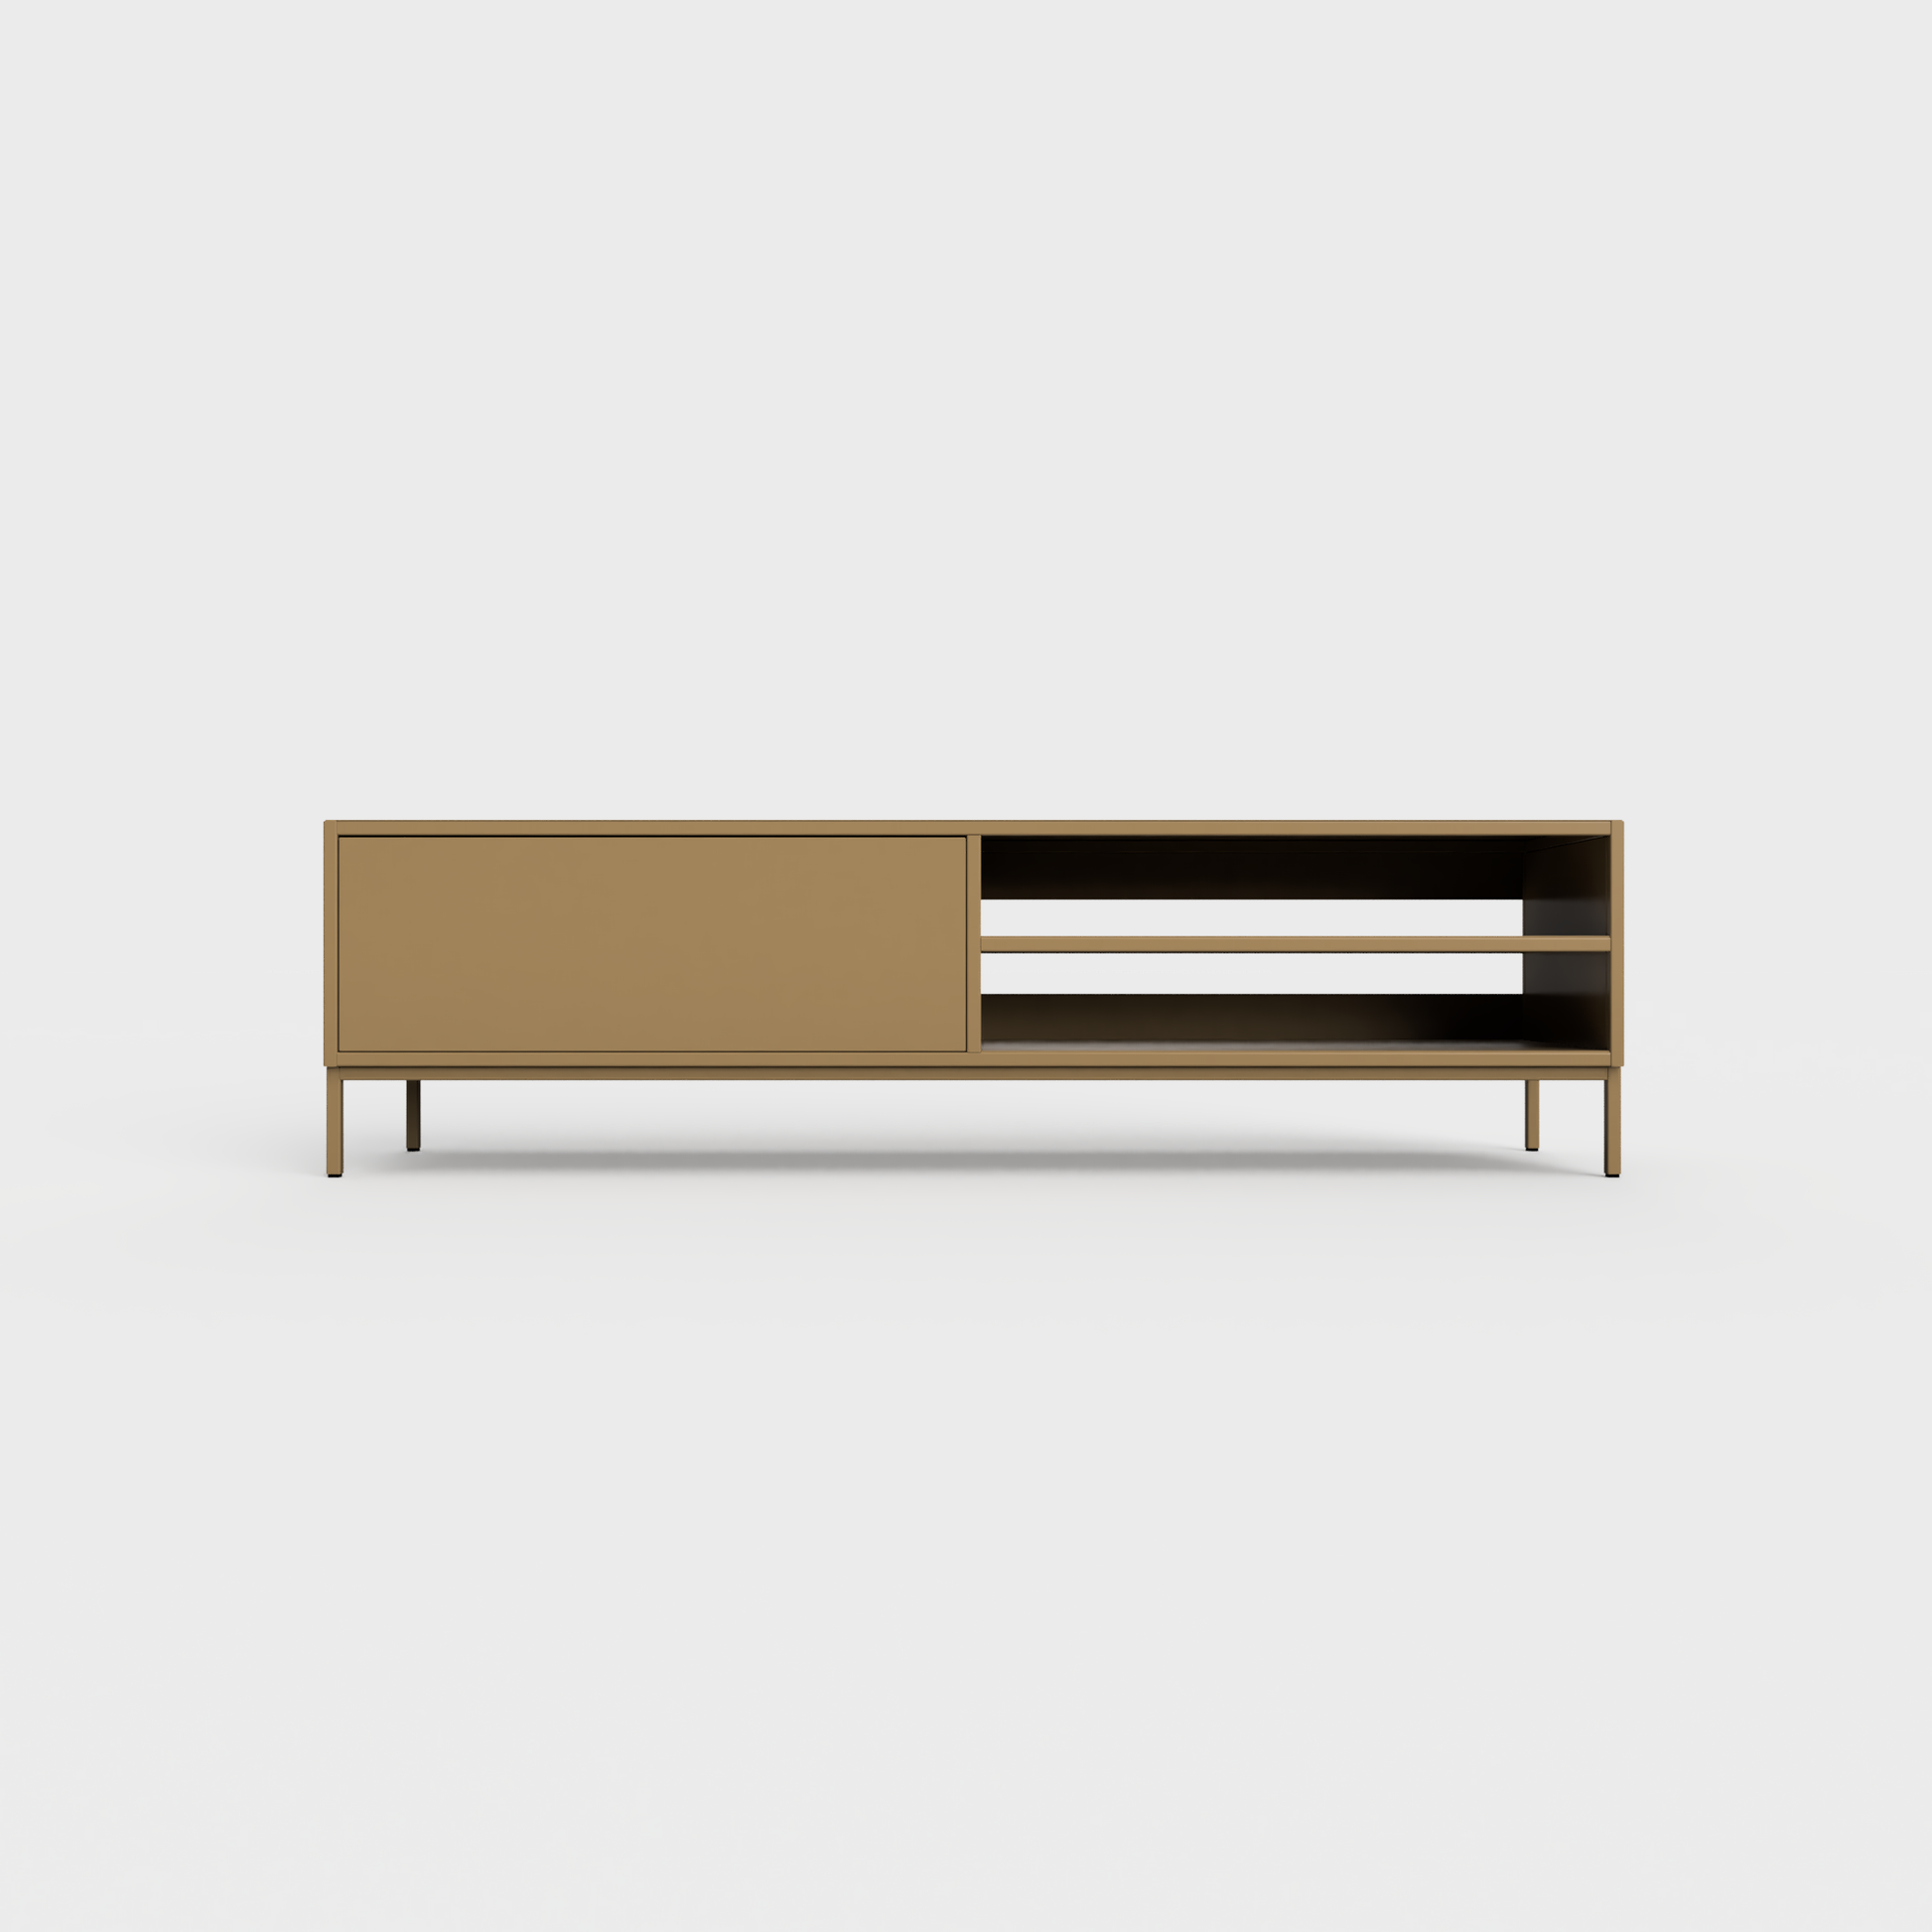 Prunus 02 Lowboard in Desert Palm color, powder-coated steel, elegant and modern piece of furniture for your living room